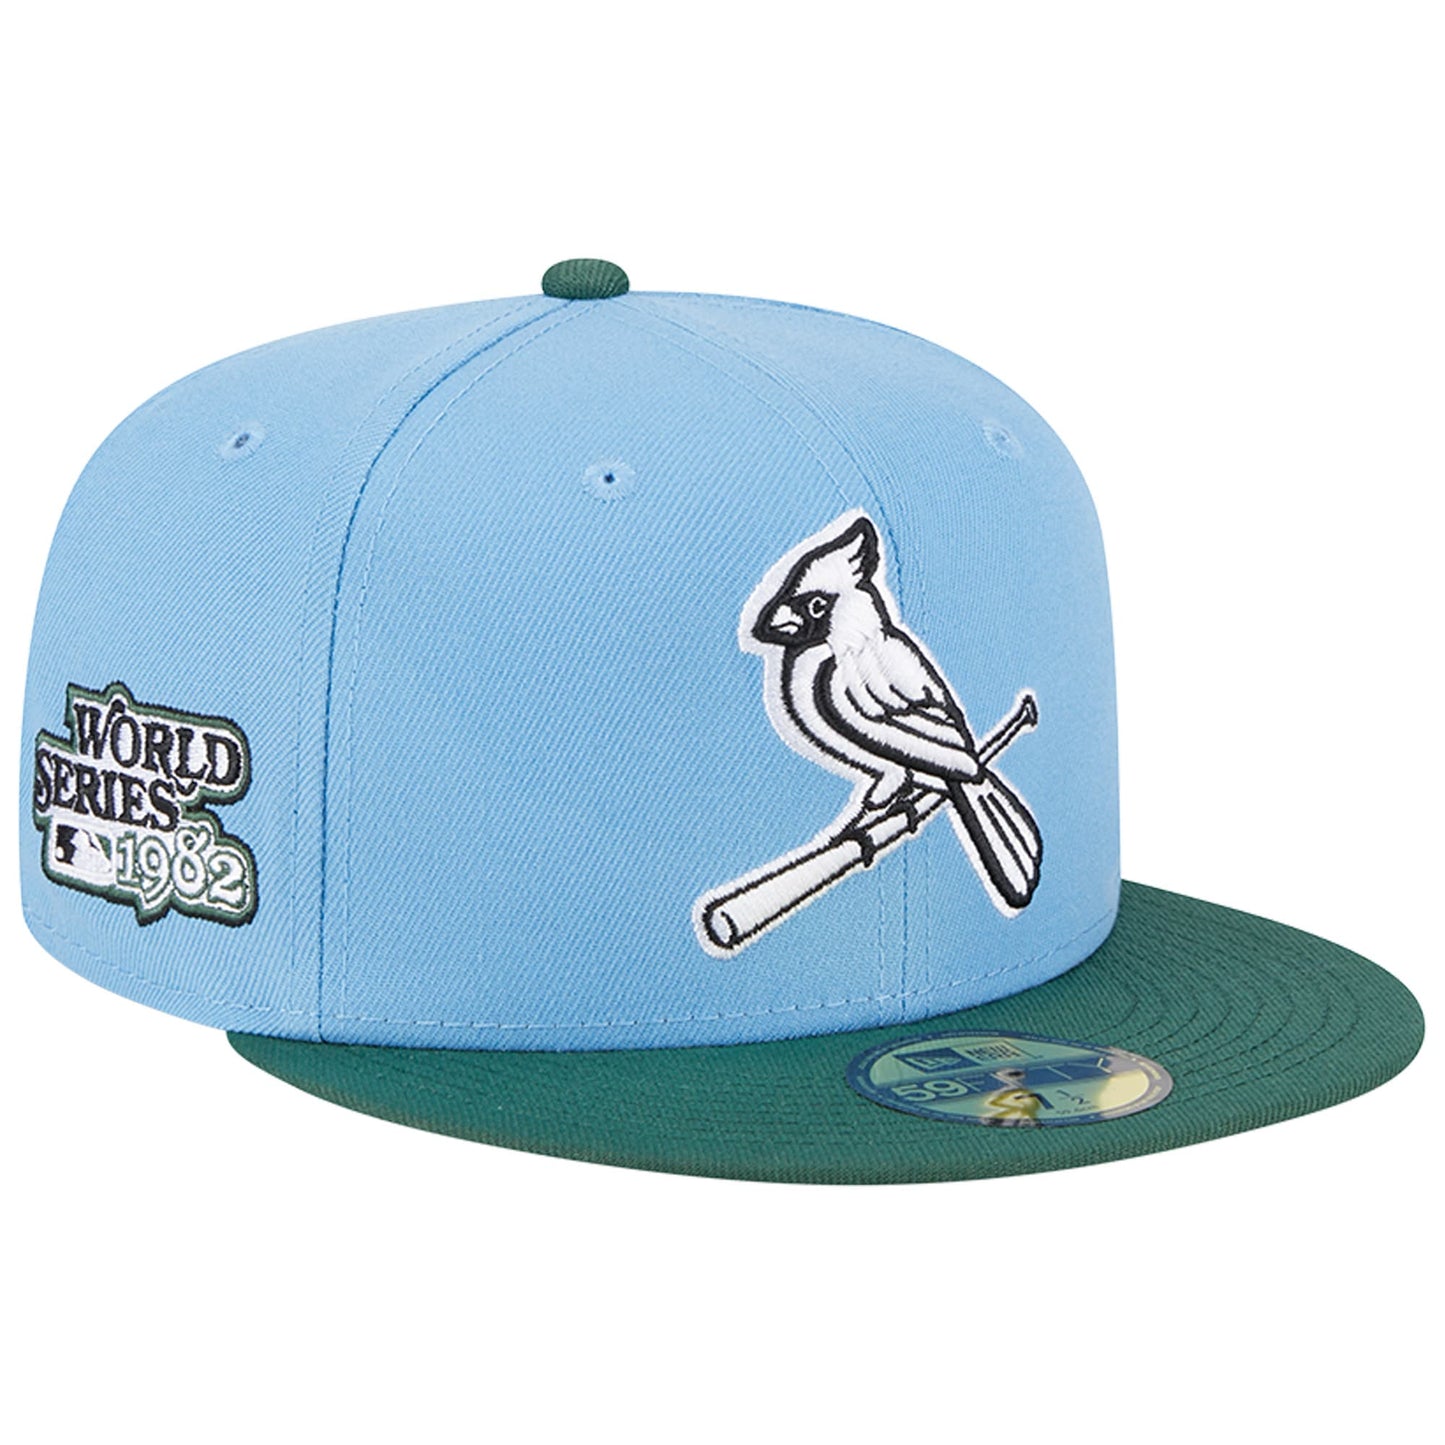 St. Louis Cardinals New Era 1982 World Series 59FIFTY Fitted Hat - Sky Blue/Cilantro